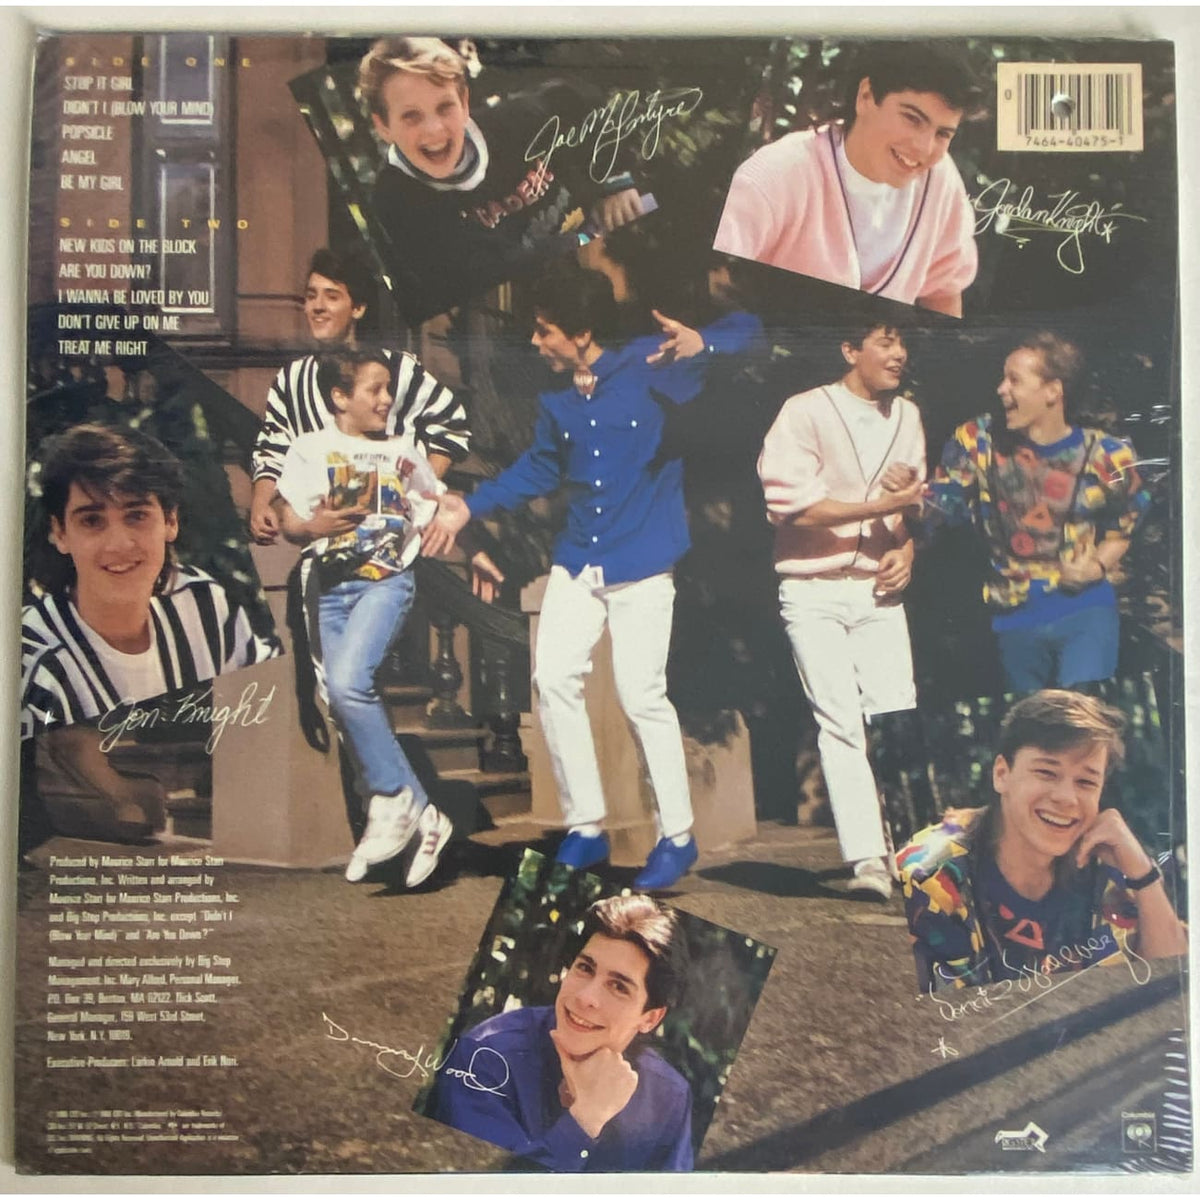 new kids on the block step by step album